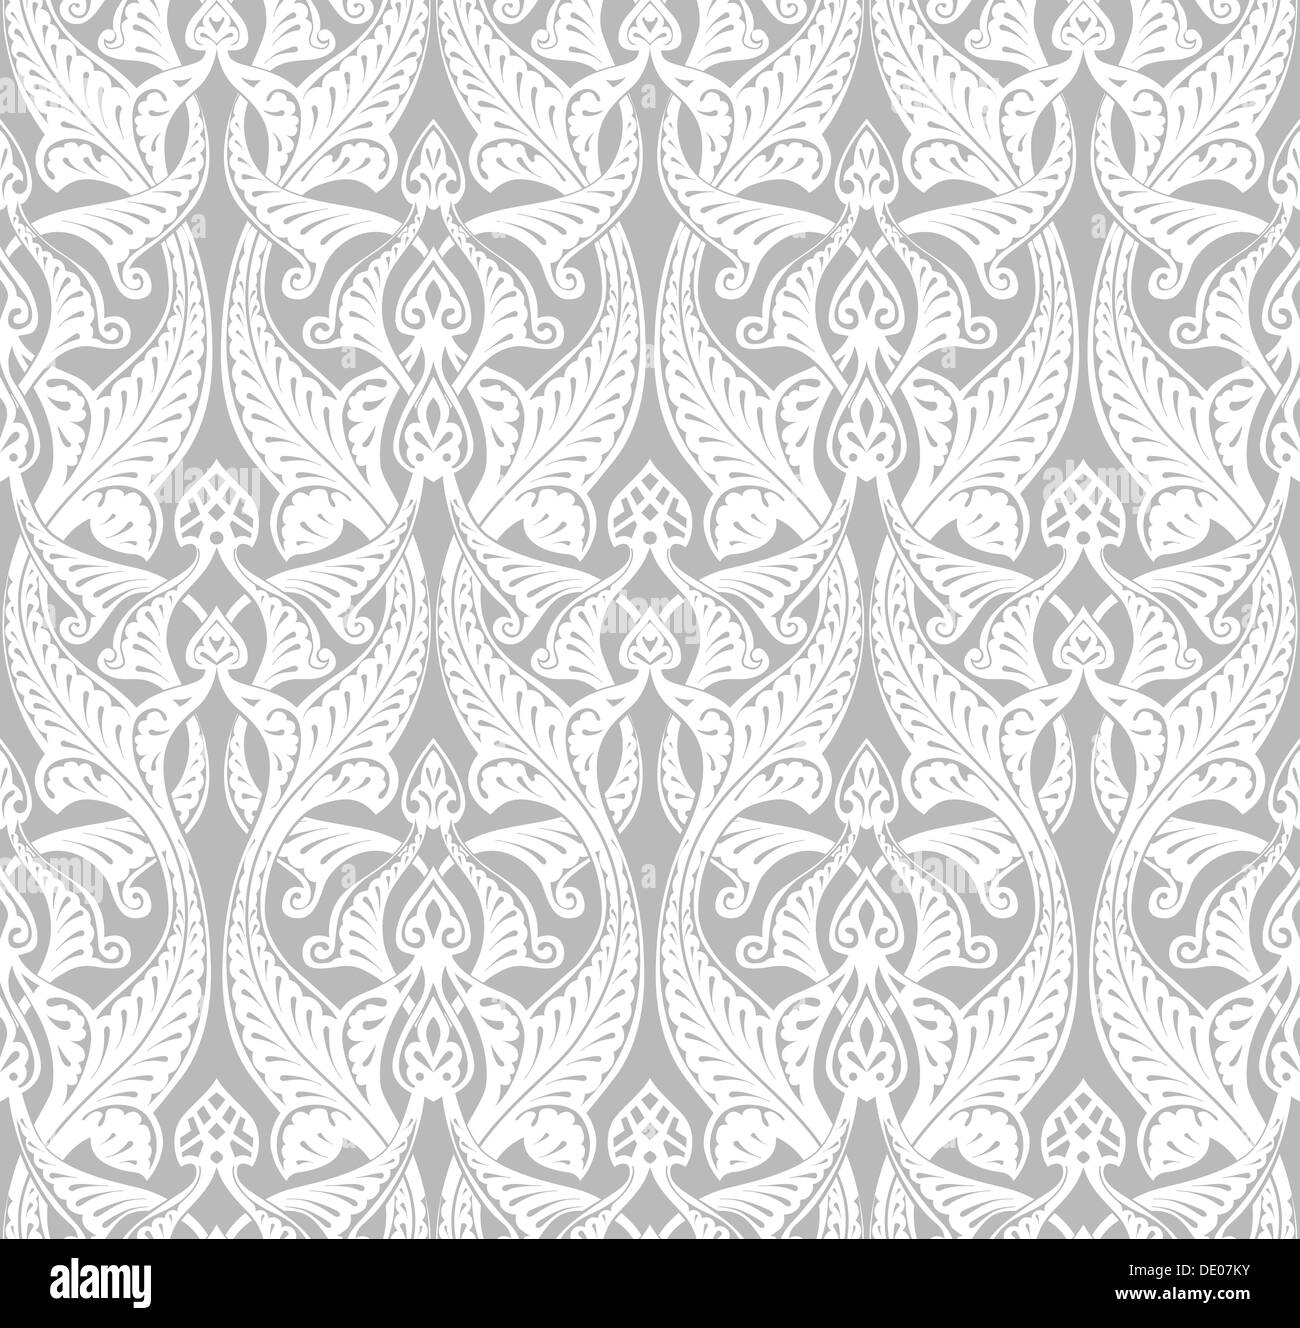 Vintage detailed seamlessly tilable repeating Art Nouveau motif background pattern Stock Photo